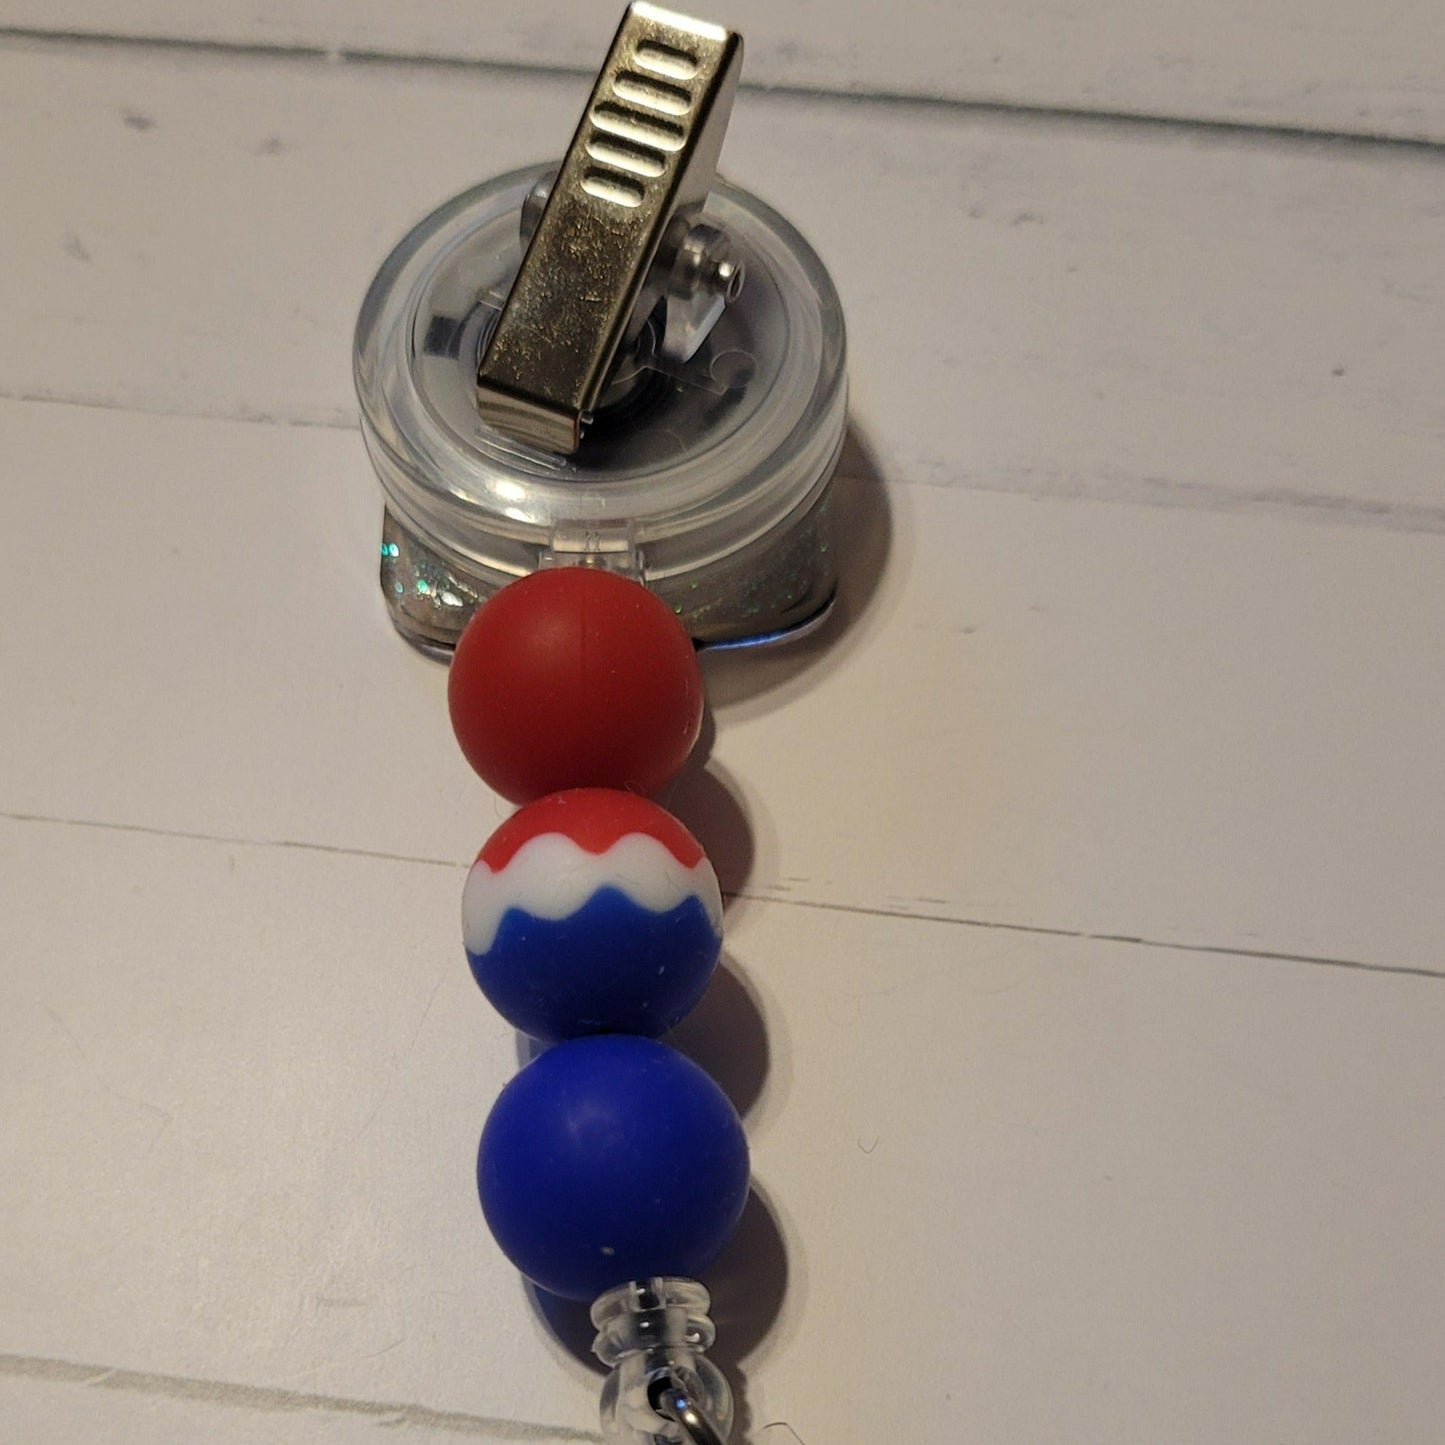 Beat the heat of summer with the time-honored treat of the Bomb Pop popsicle. This acrylic badge reel features red, white, and blue silicone accent beads to complete its classic look.